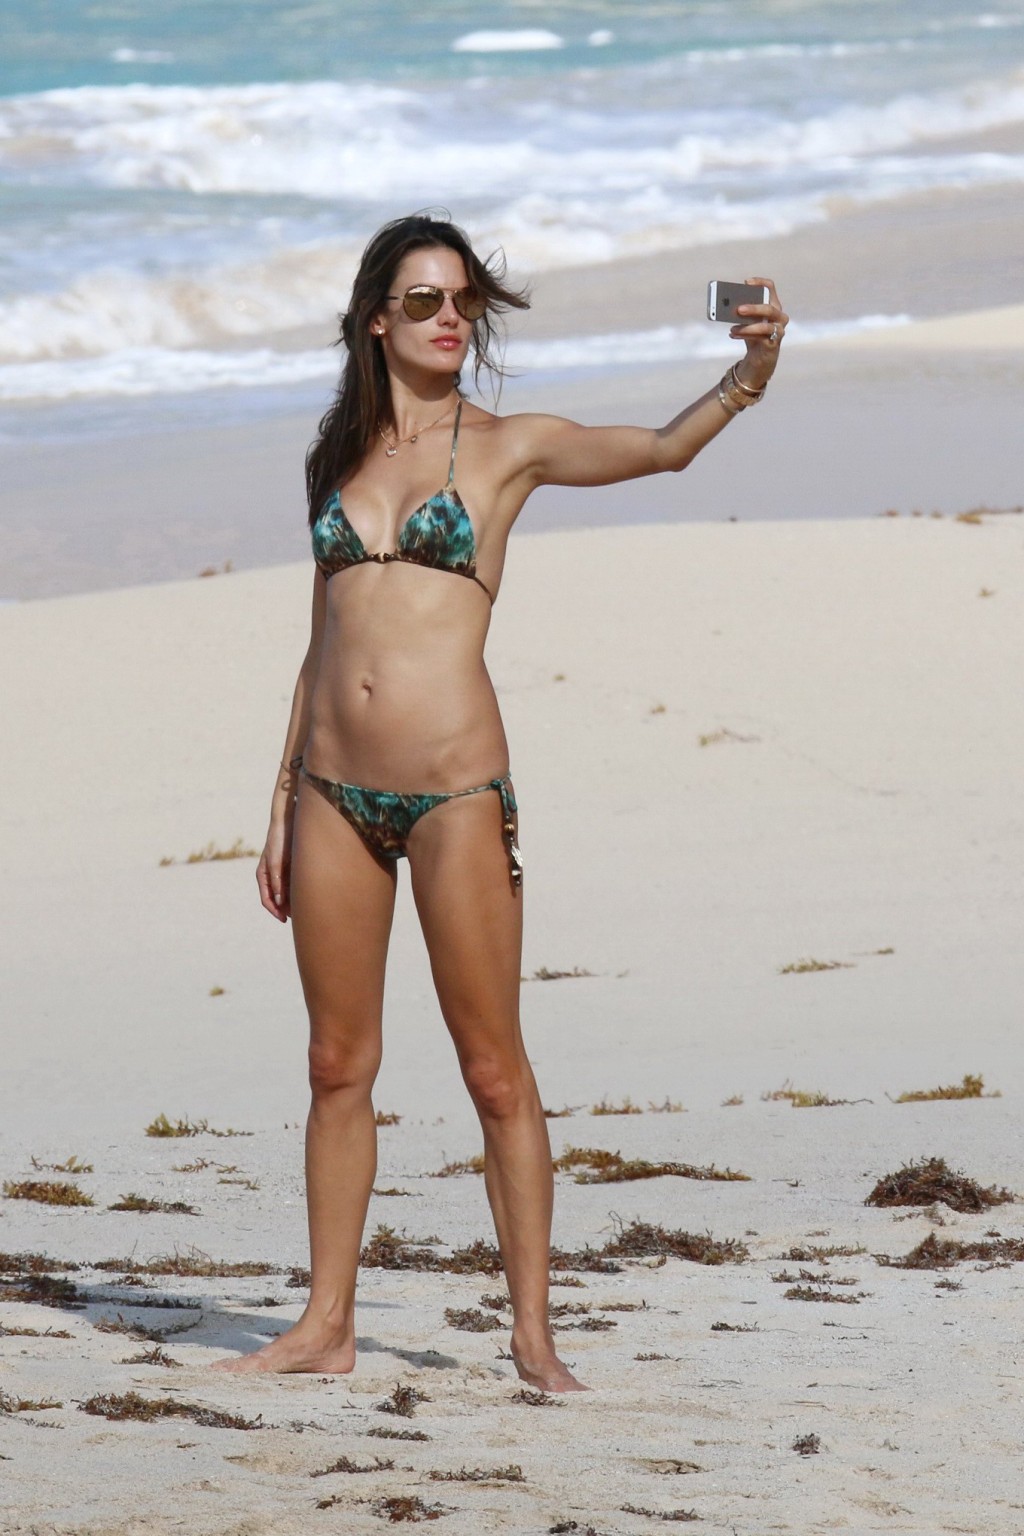 Alessandra Ambrosio Shows Off Her Ass In A Tiny Colorful Bikini At The